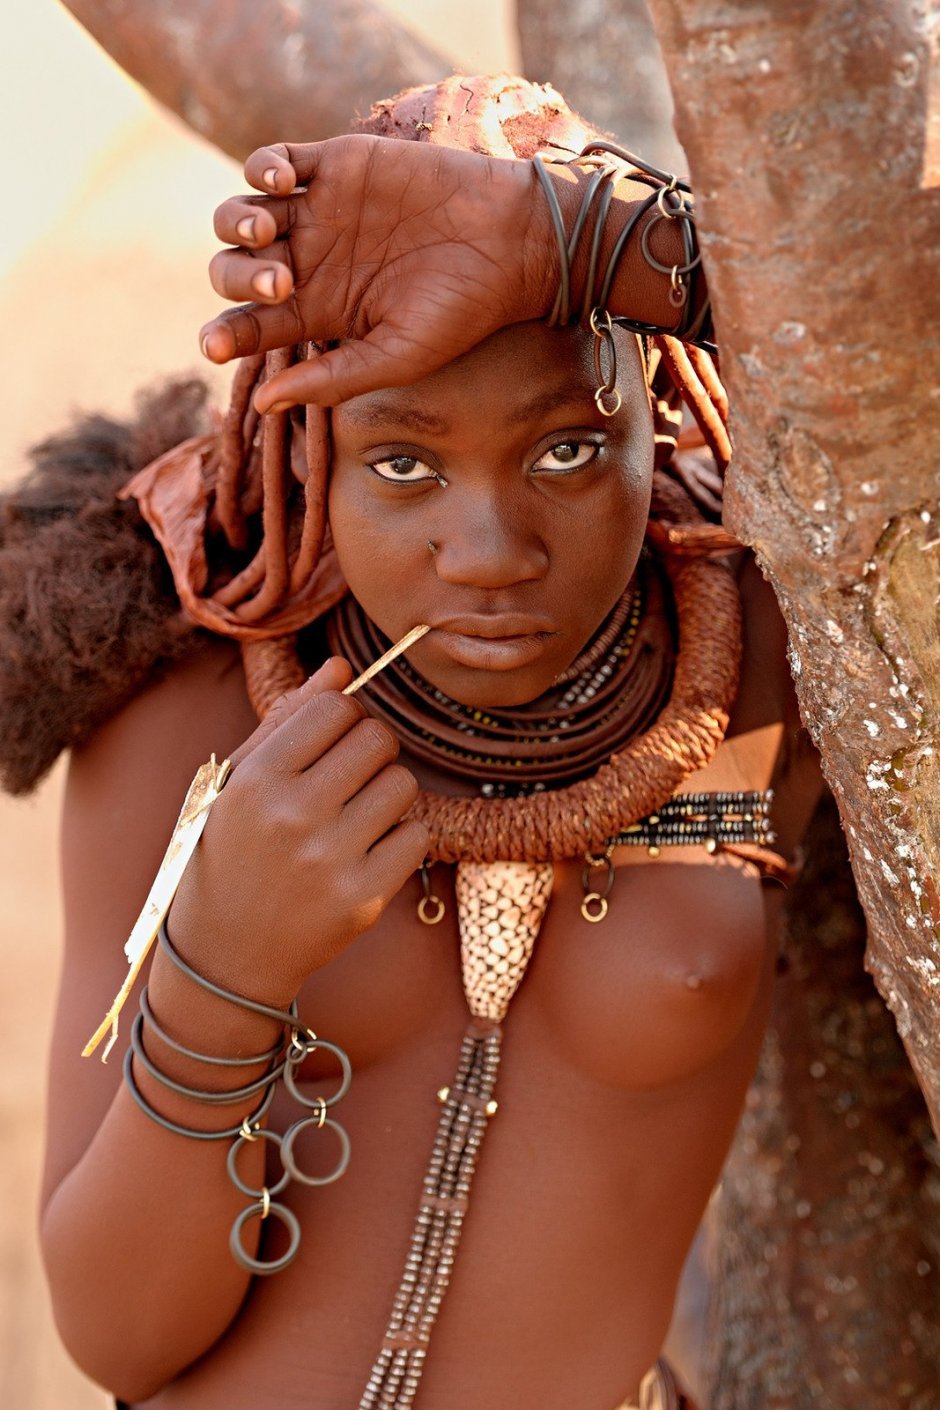 African Tribe Nudes picture image